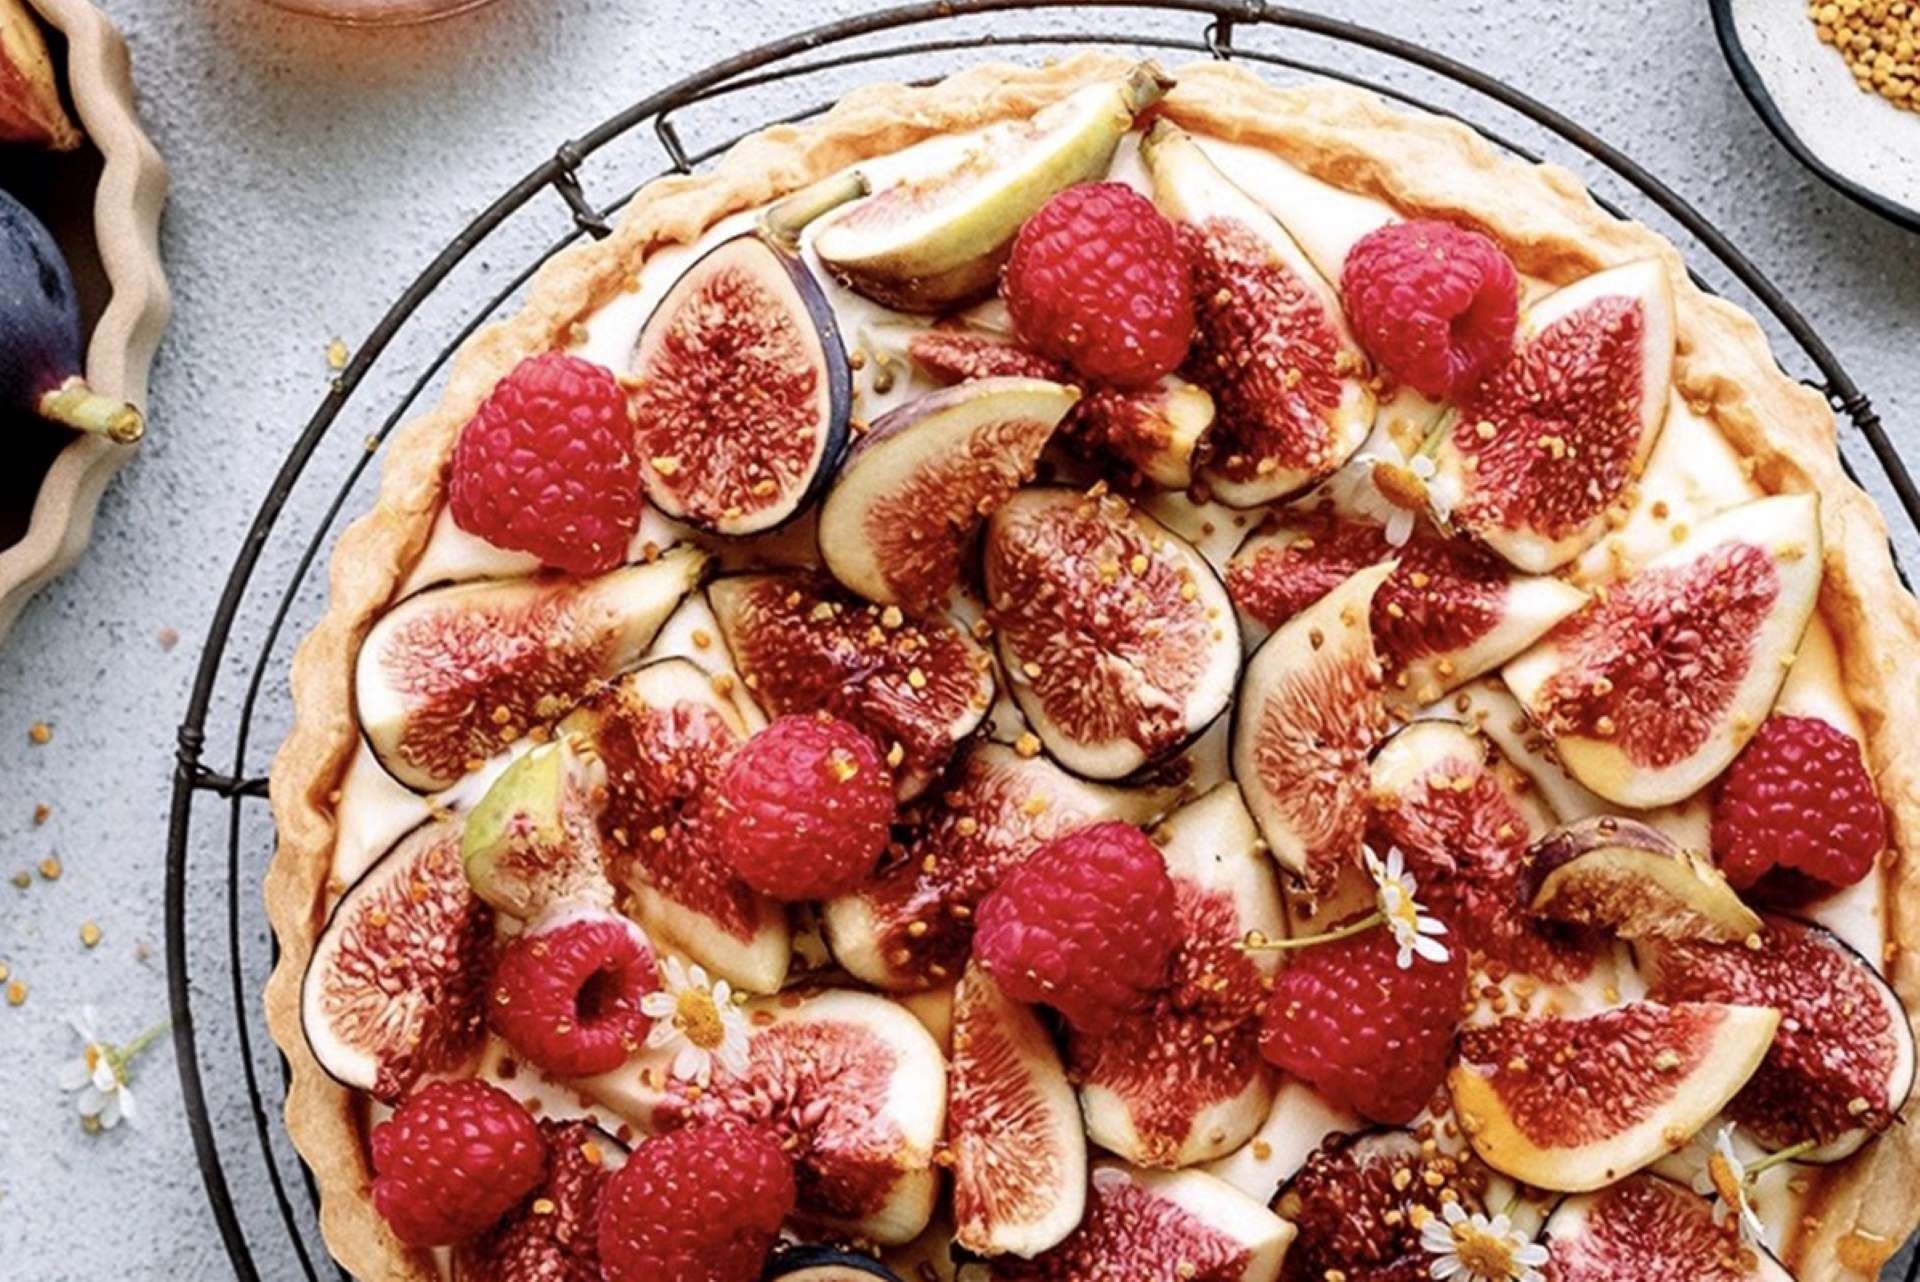 Apple Who? These 13 Summer Fruit Pies, Tarts And Galettes Are The Real American Dream